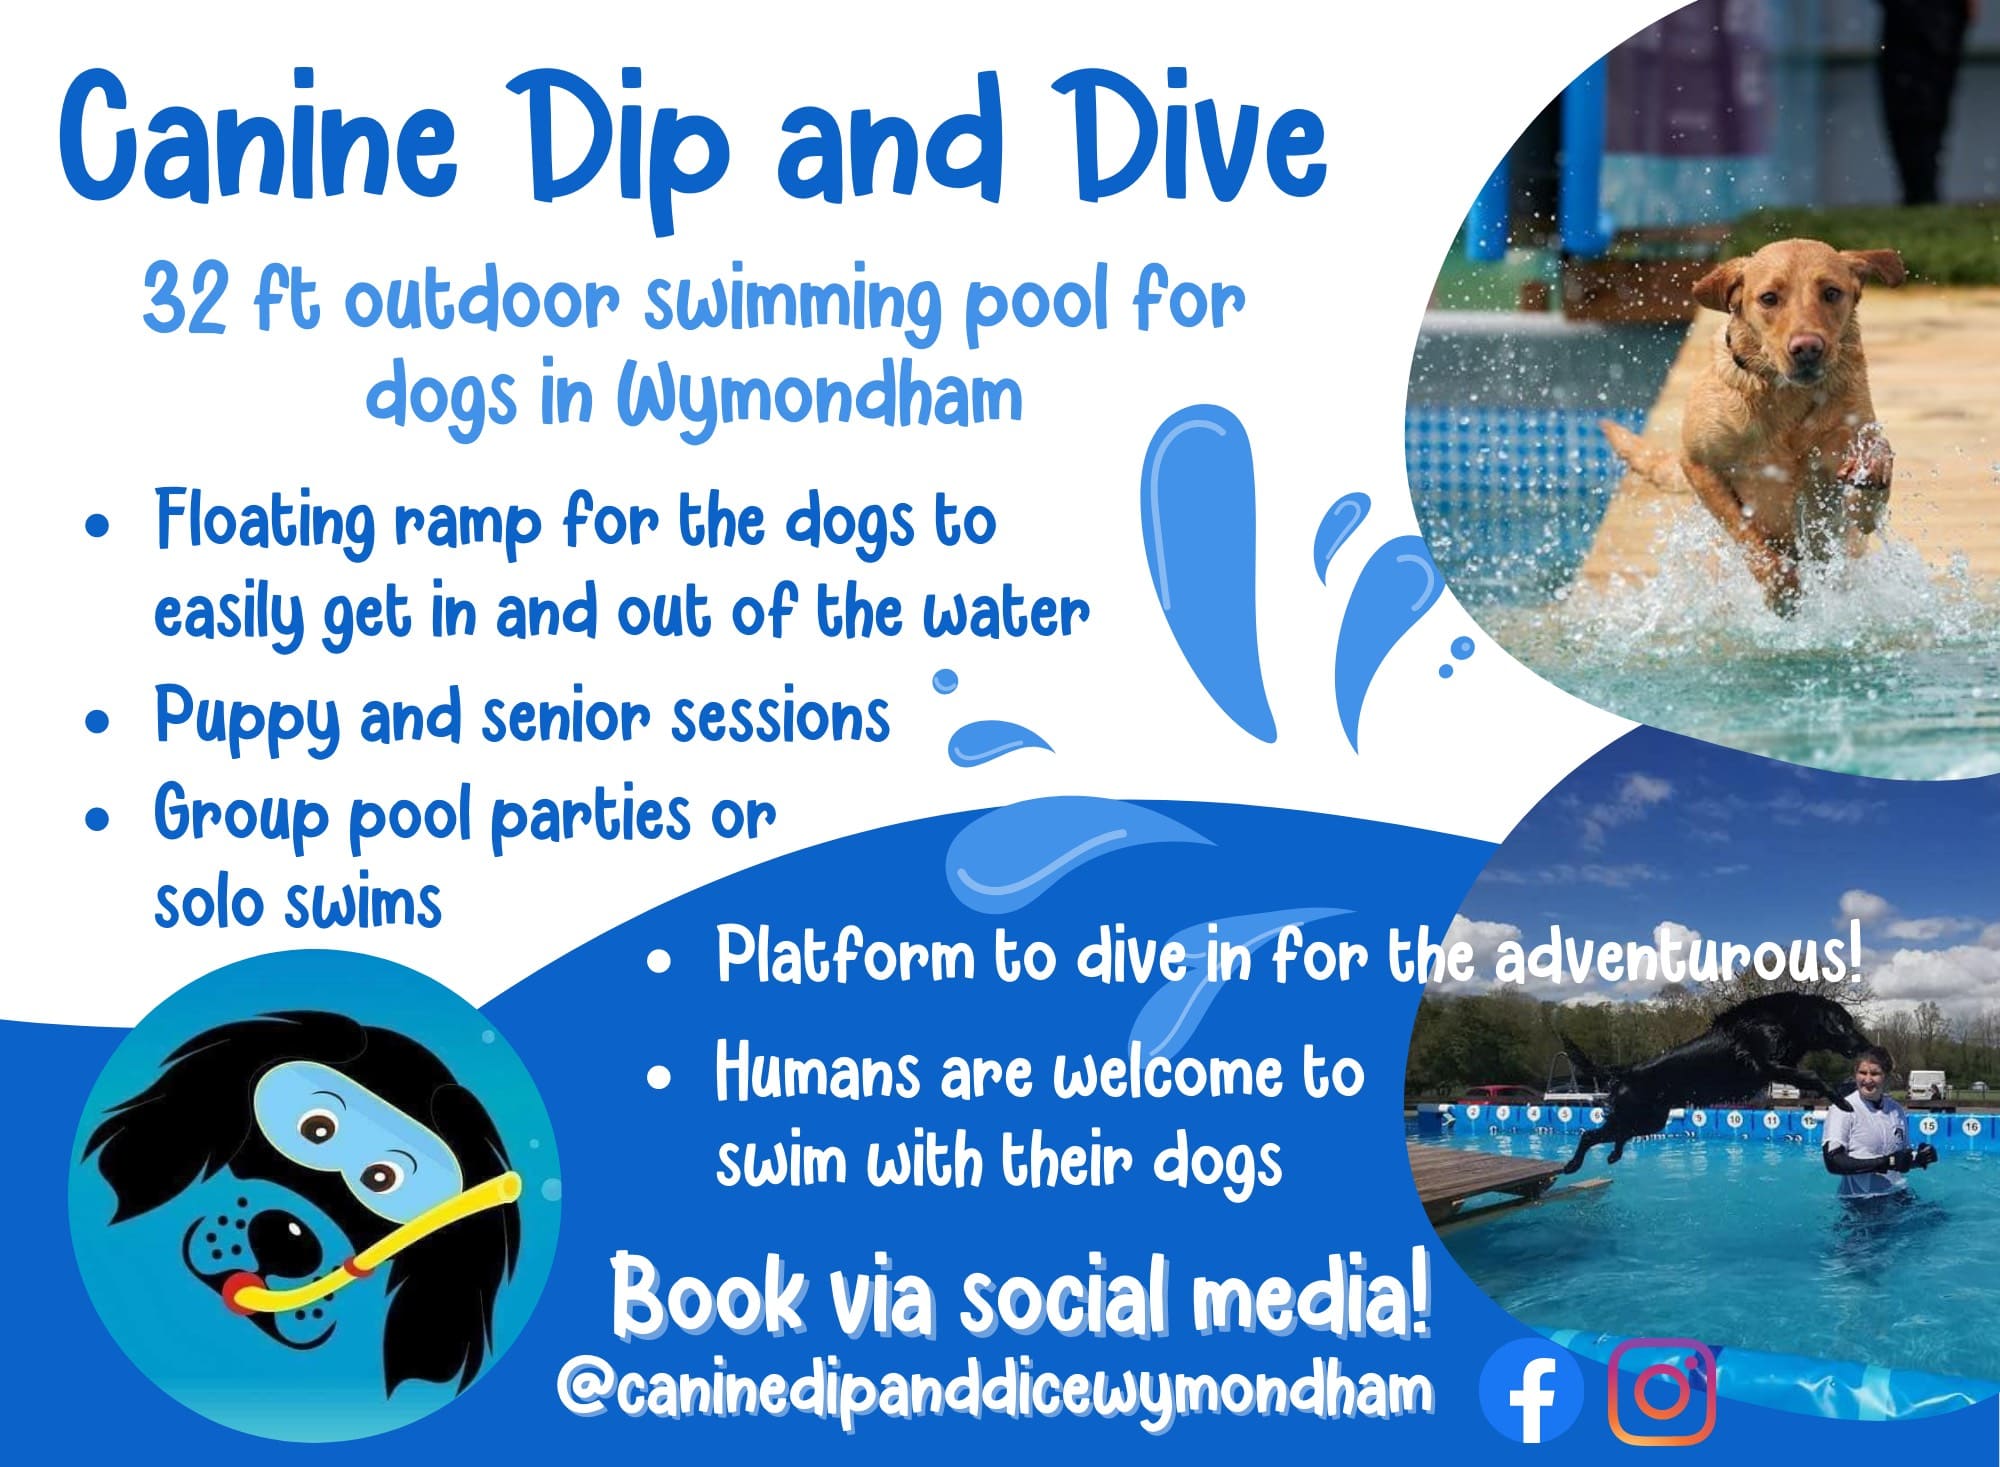 Canine Dip and Dive Advert